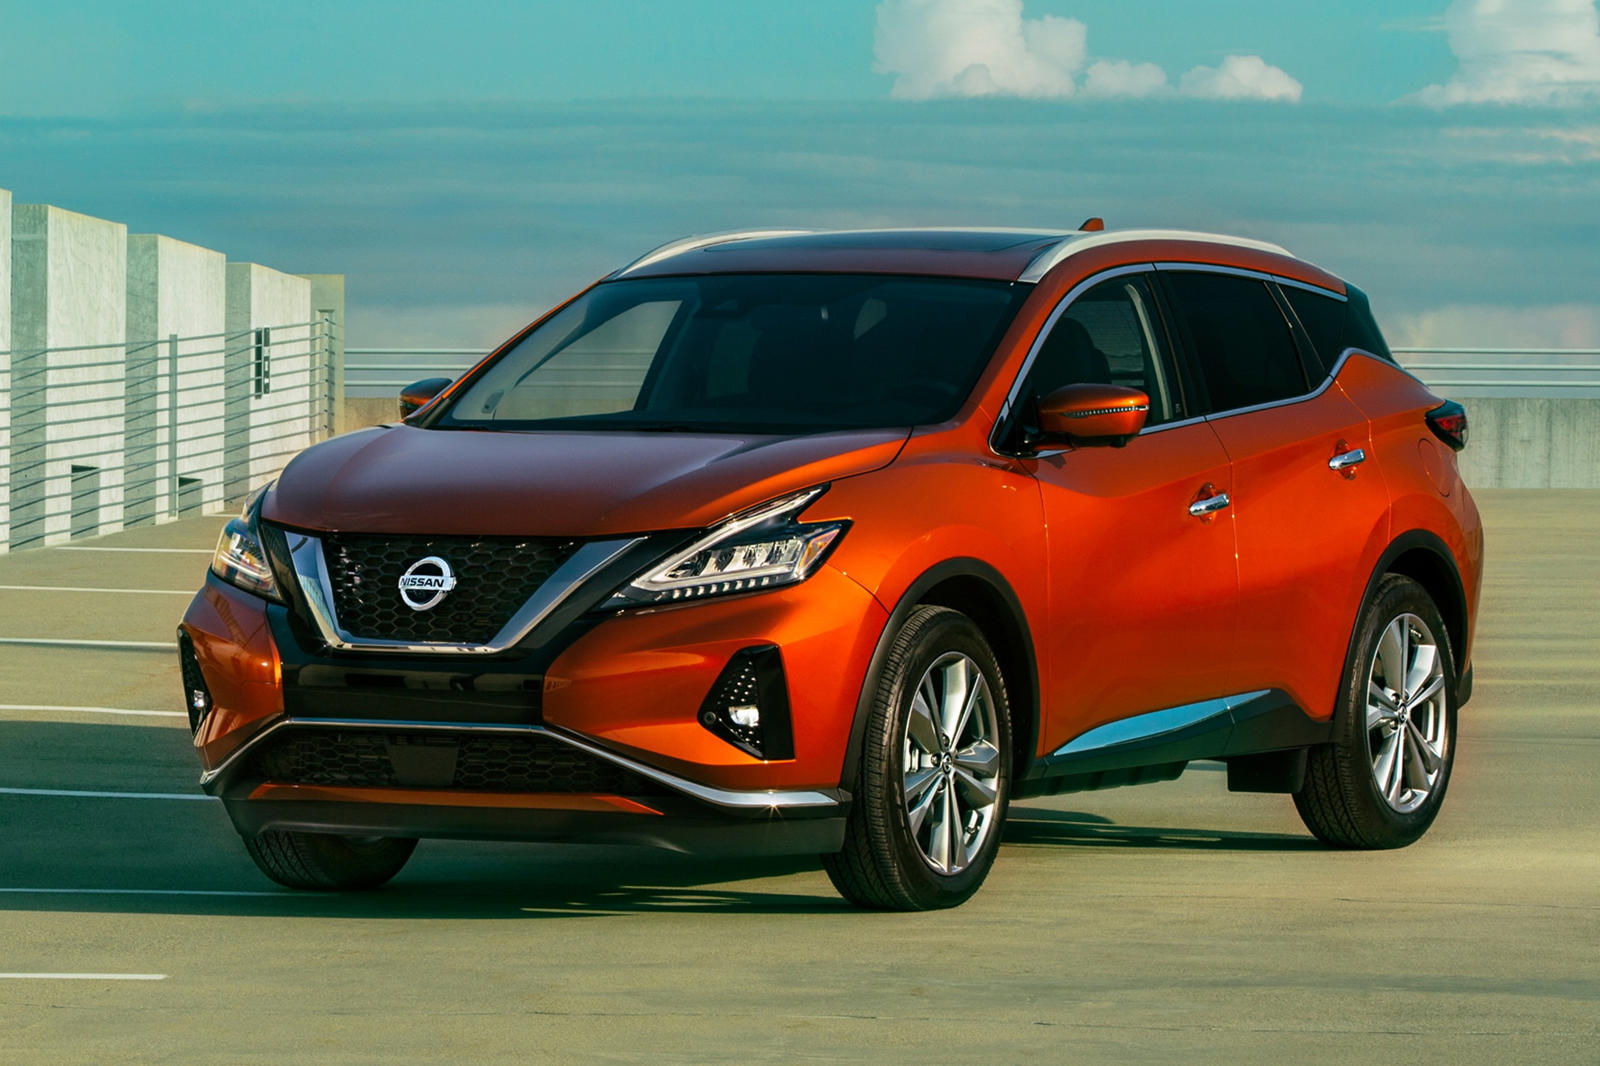 2021 Nissan Murano: Review, Trims, Specs, Price, New Interior Features